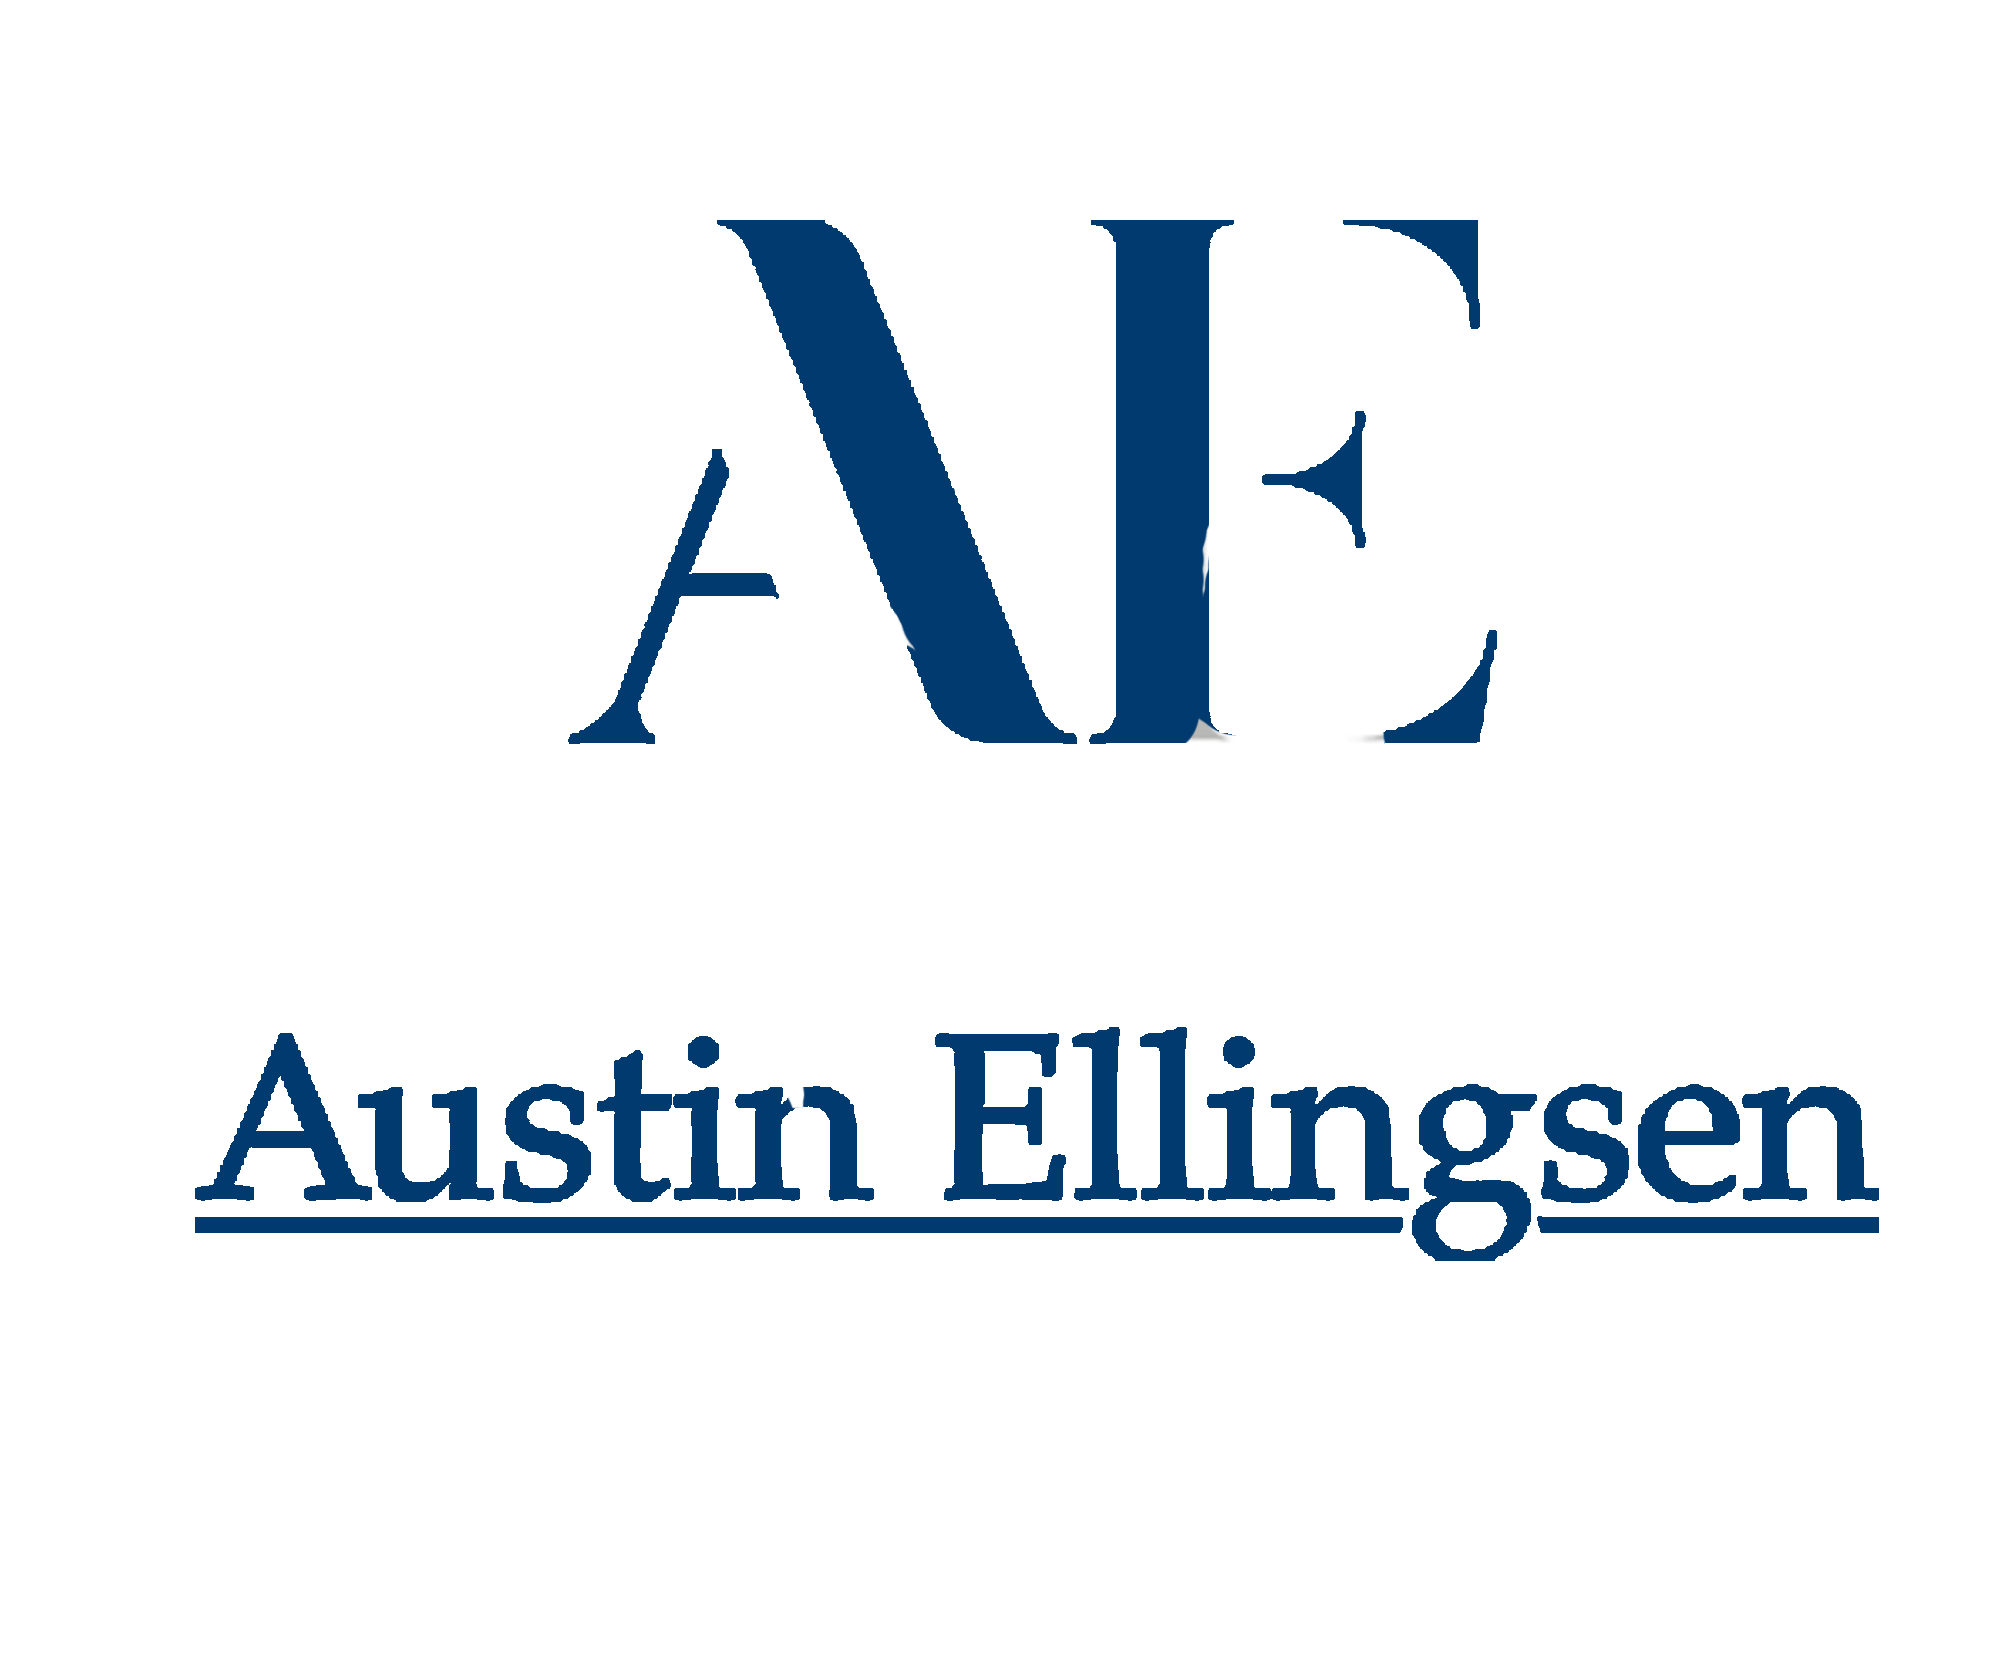 Located in USA, Austin Ellingsen collaborates with Multicats International.